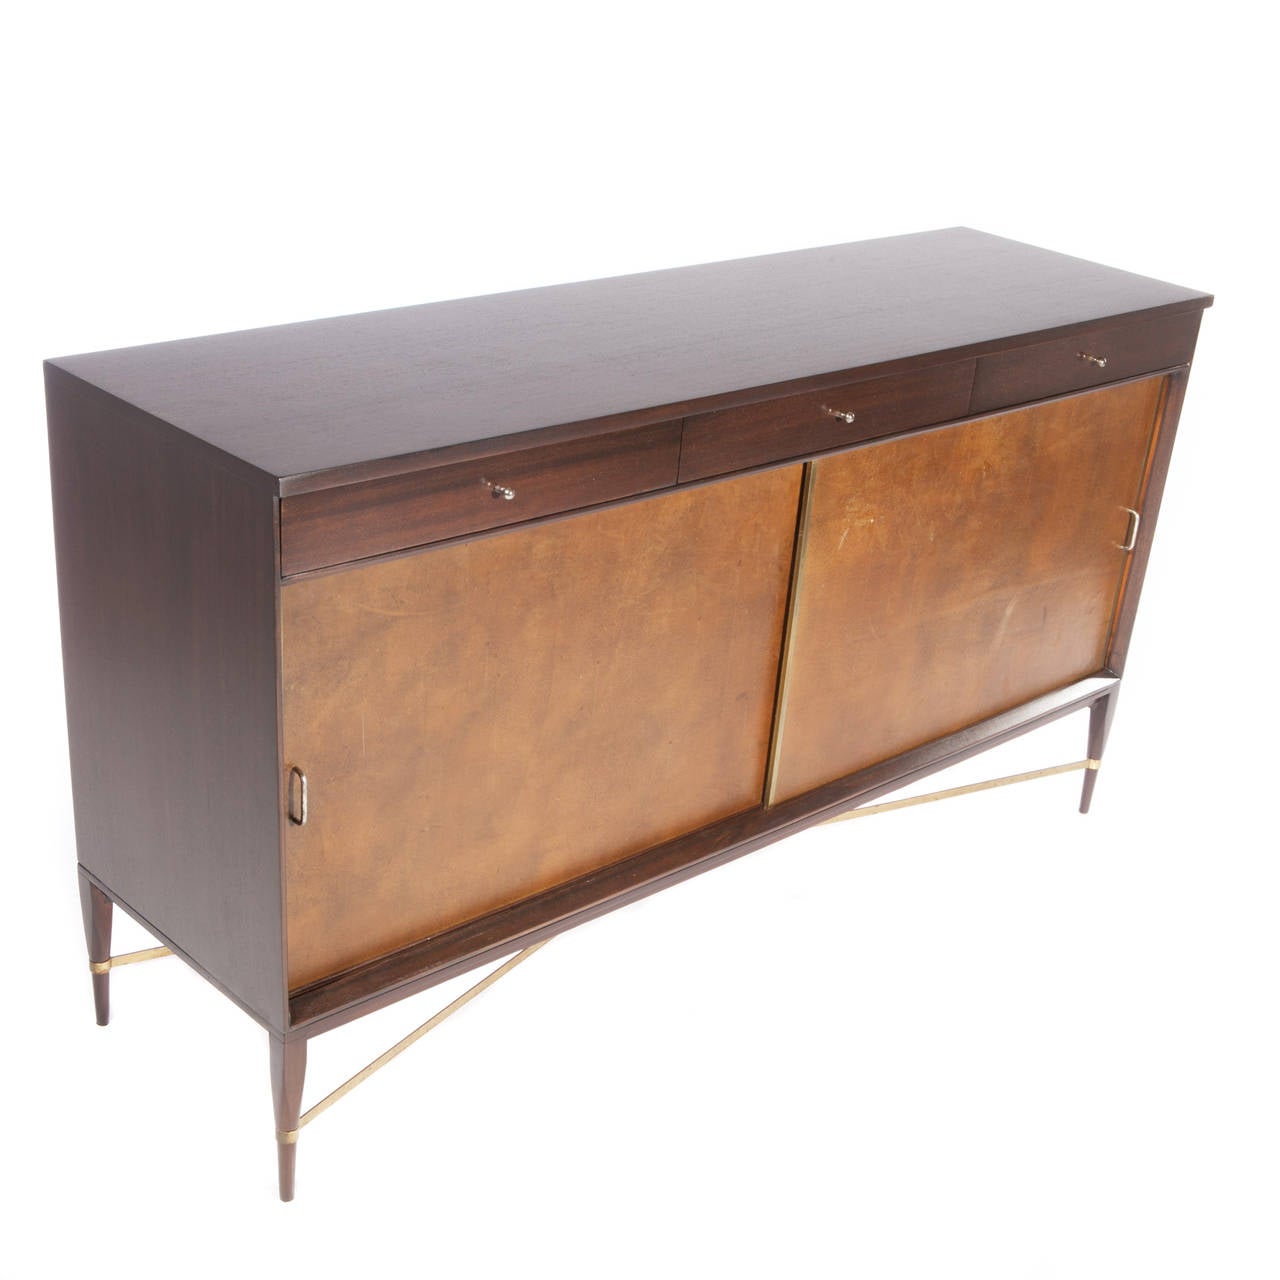 Nicely proportioned cabinet with four tapered legs with brass cross stretchers, two leather-clad sliding doors and three drawers with original brass pulls. Signed with Calvin label to inside of drawer. This item is located in our New Jersey